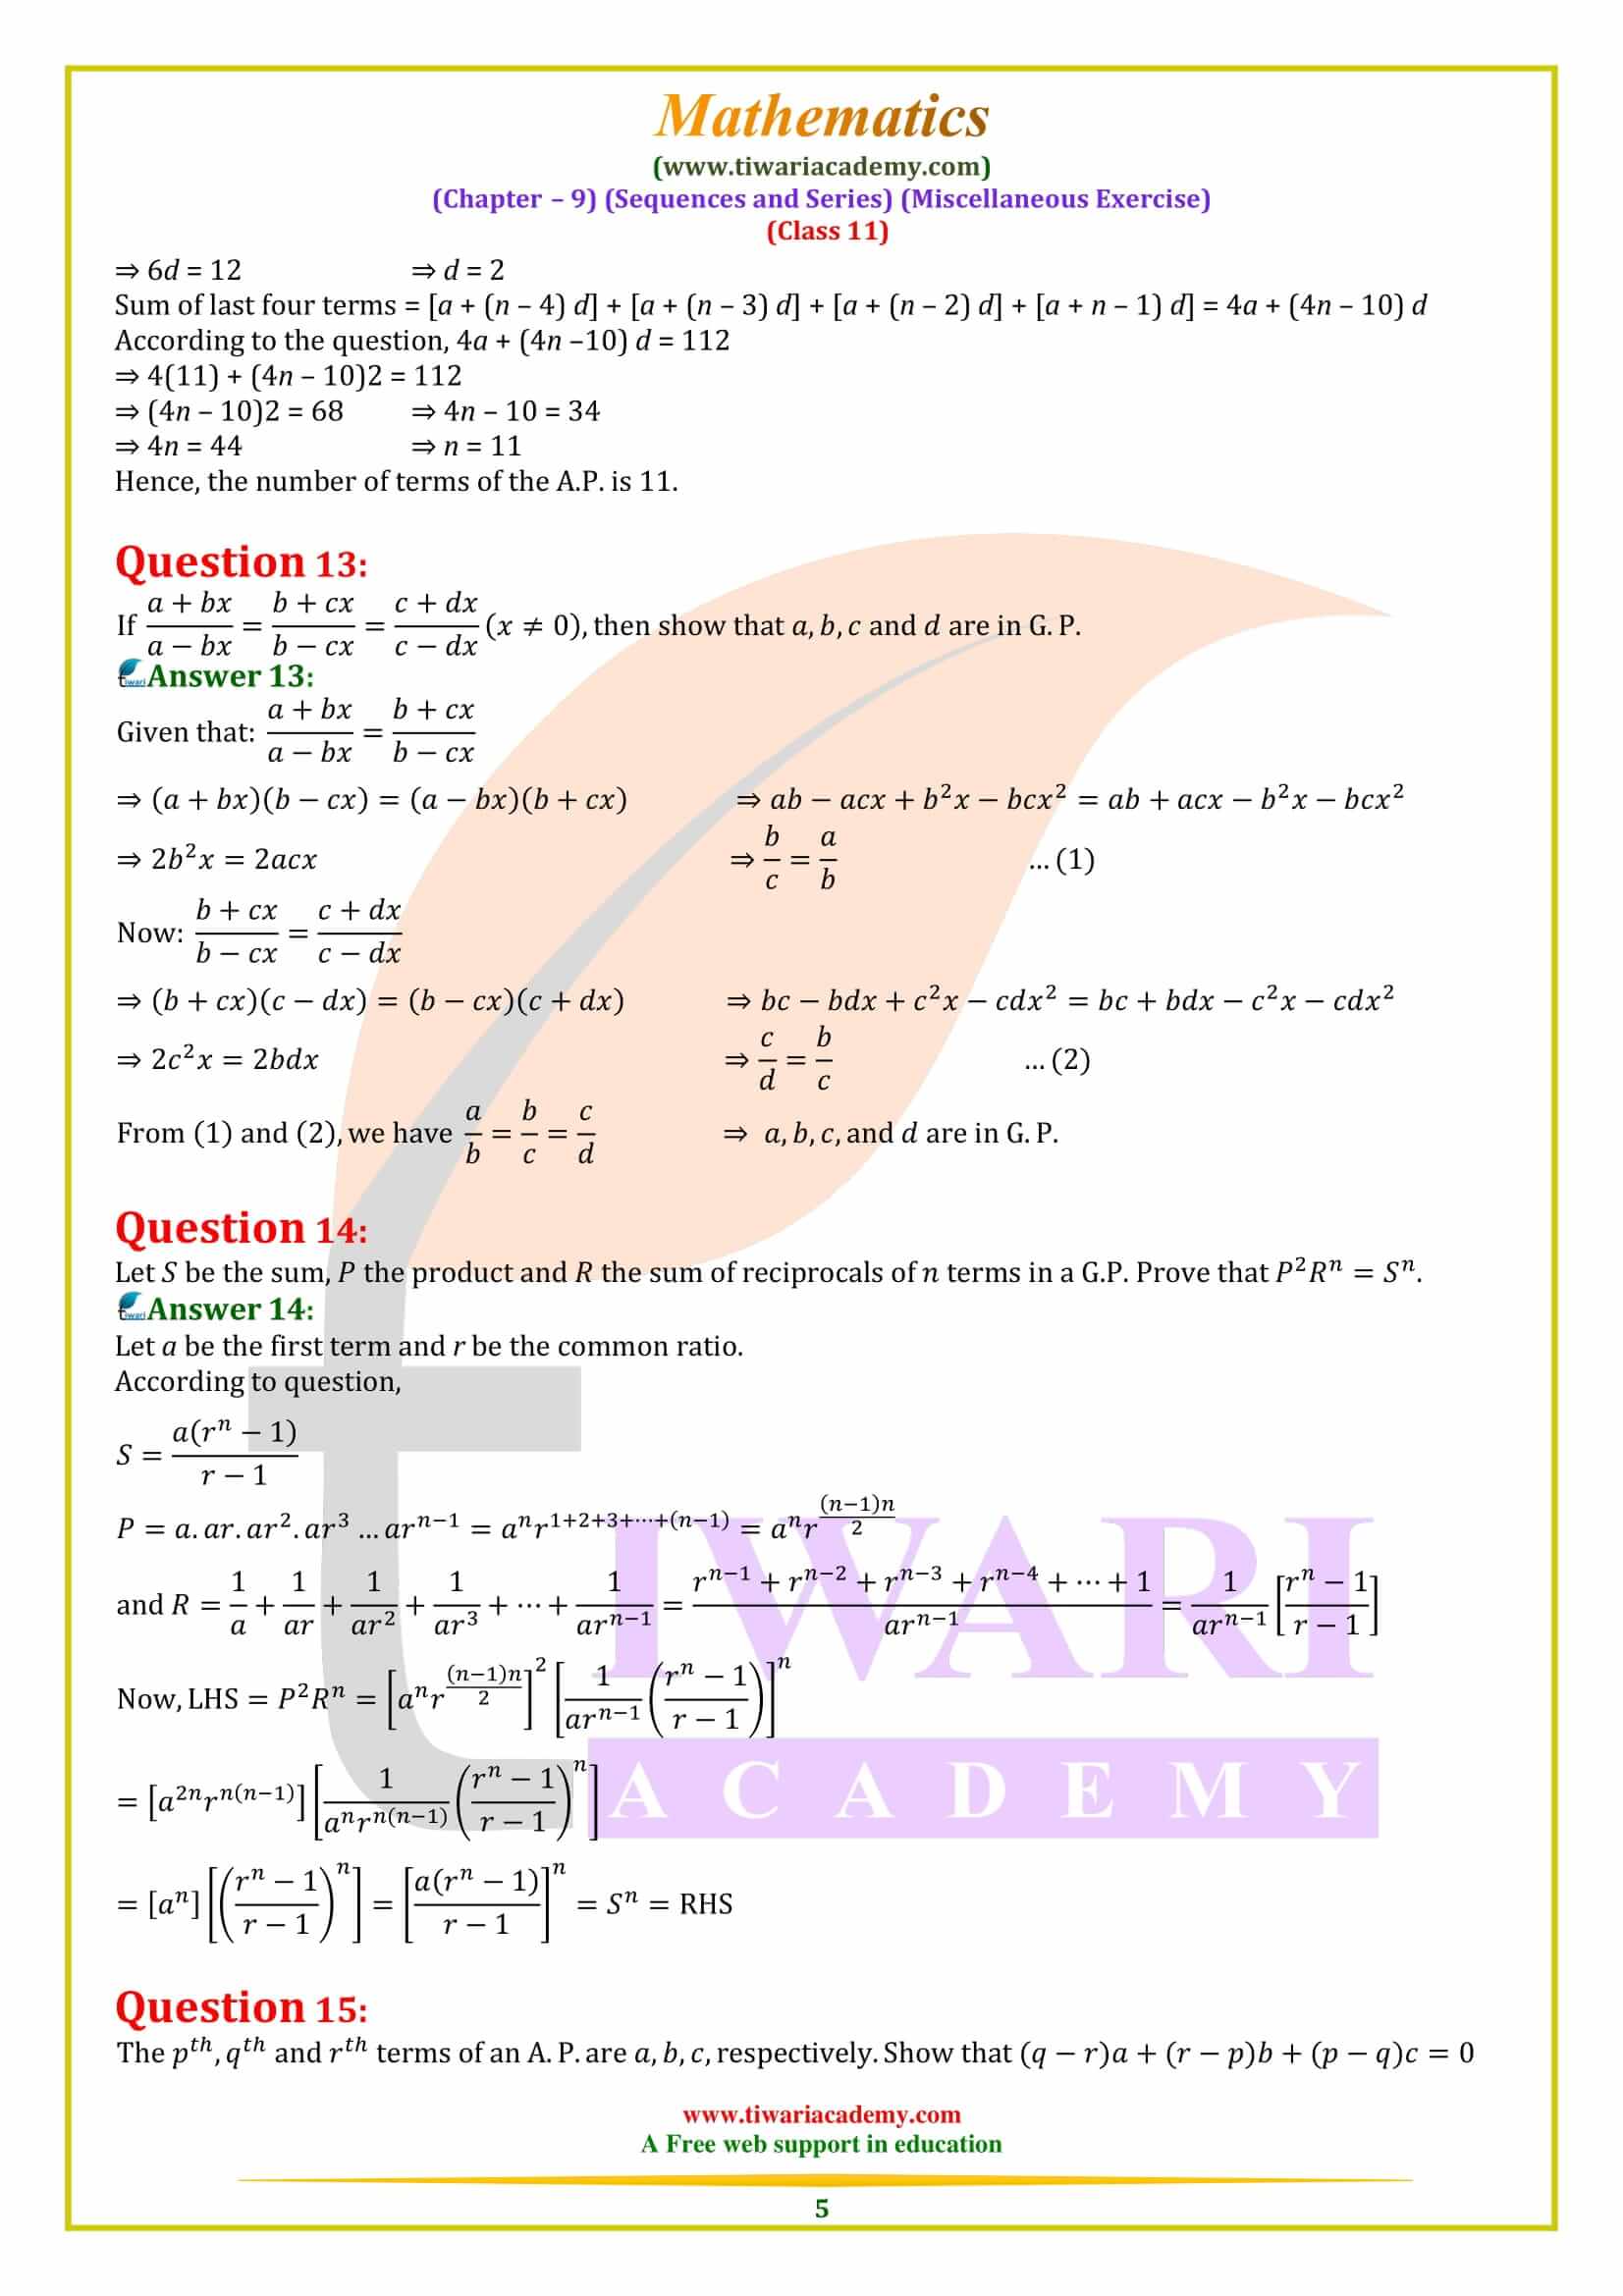 NCERT Solutions for Class 11 Maths Chapter 9 Miscellaneous Exercise in Hindi and English